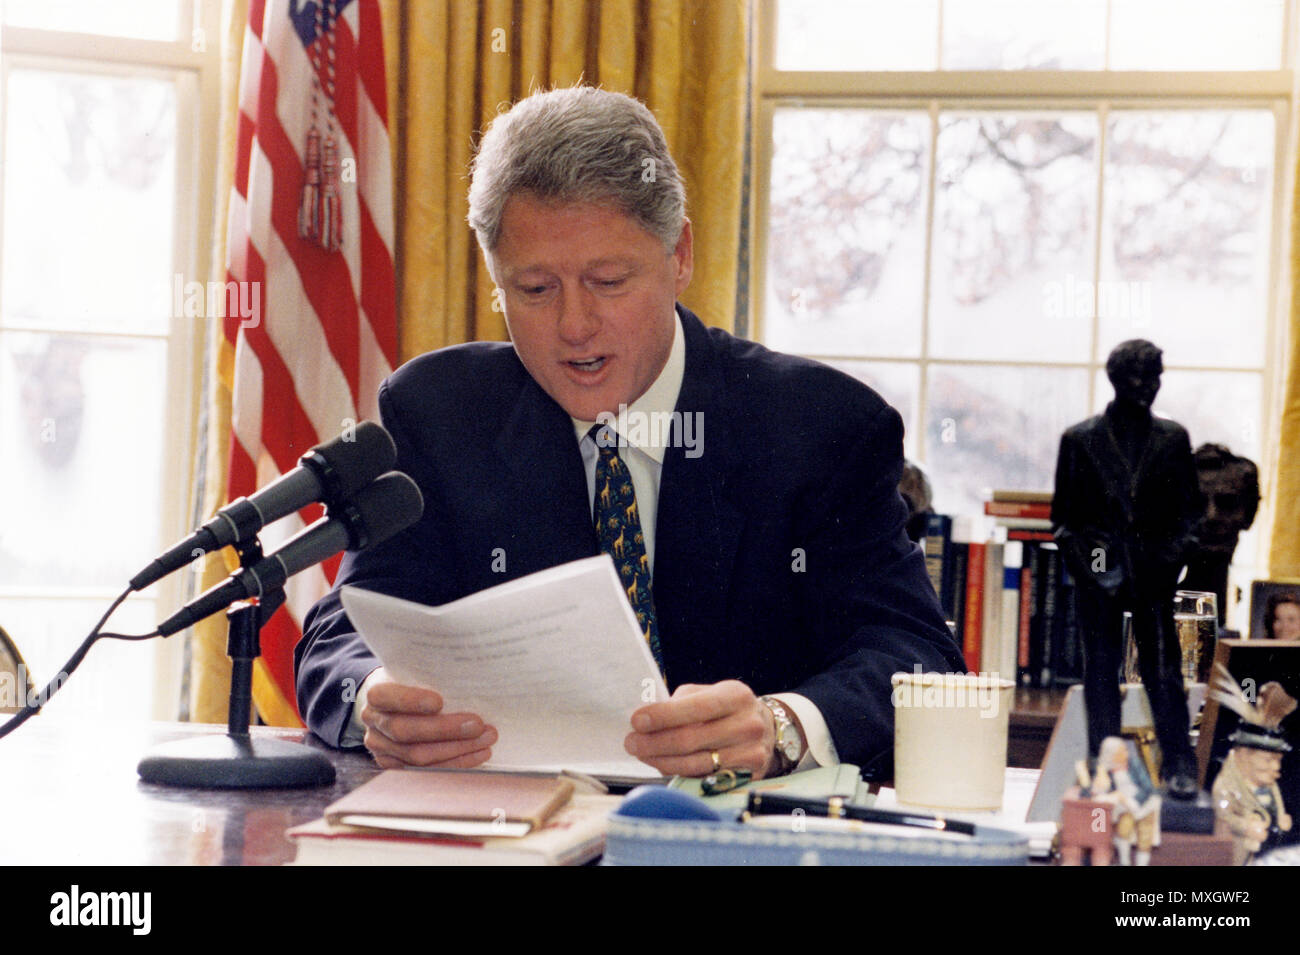 file-photo-bill-clinton-has-not-apologized-to-monica-lewinsky-and-claims-did-the-right-thing-staying-in-office-united-states-president-bill-clinton-delivers-his-radio-address-on-the-budget-live-from-the-oval-office-of-the-white-house-in-washington-dc-on-january-6-1996-mandatory-credit-barbara-kinneywhite-house-via-cnp-mediapunch-MXGWF2.jpg